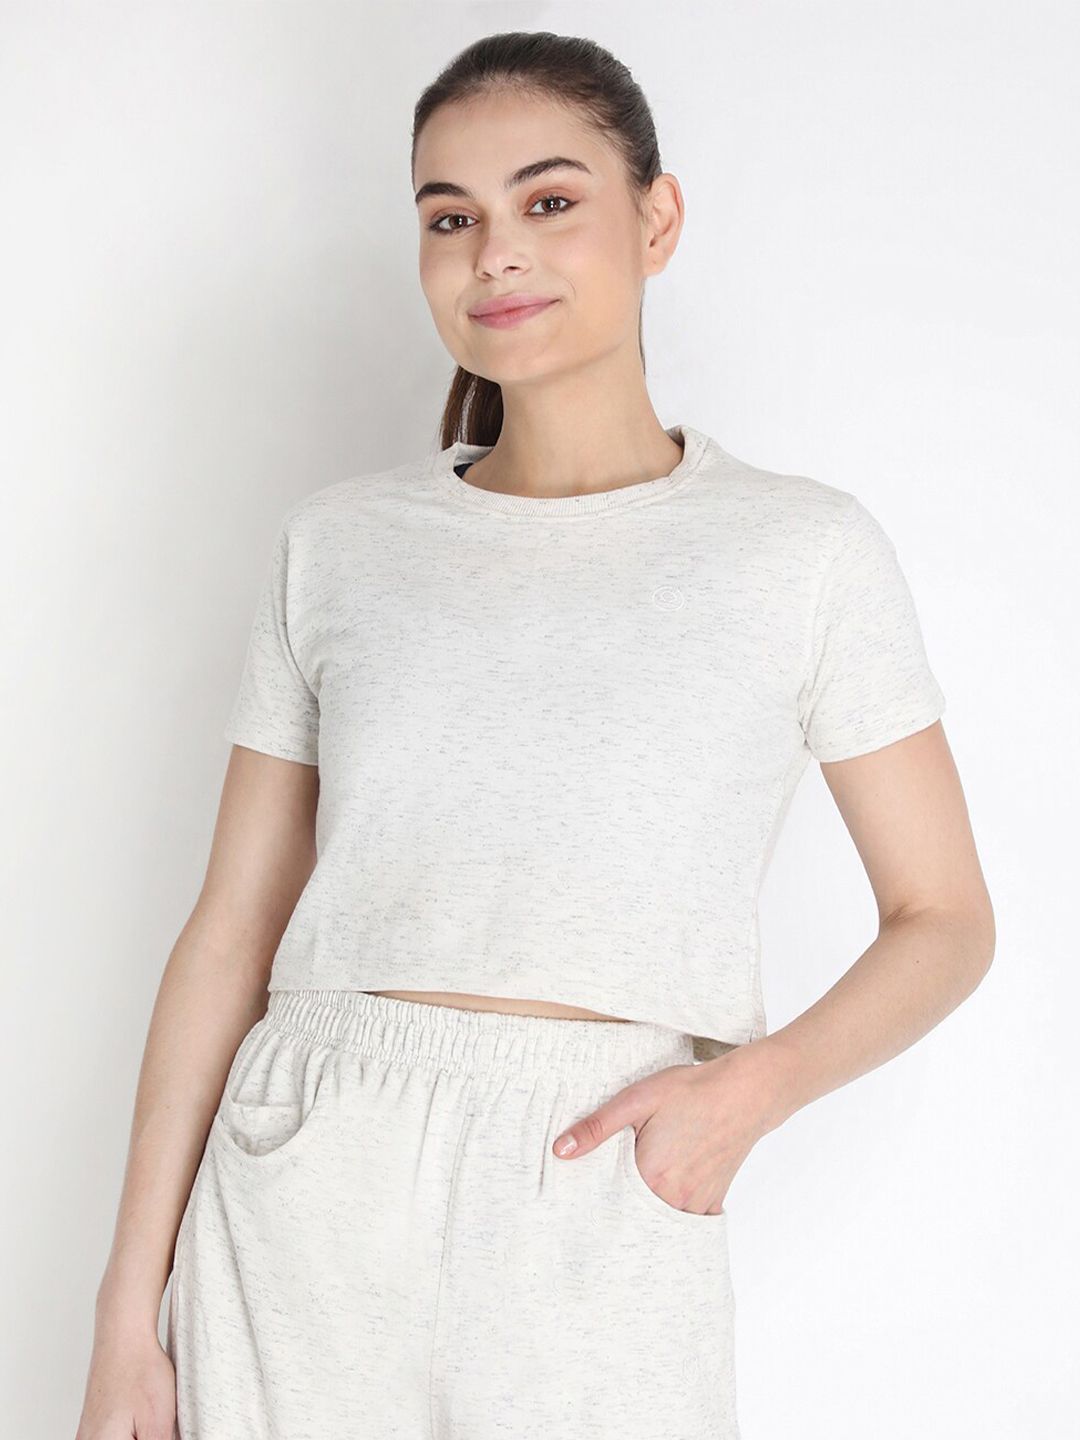 Chkokko Off White Cropped T-shirt Price in India